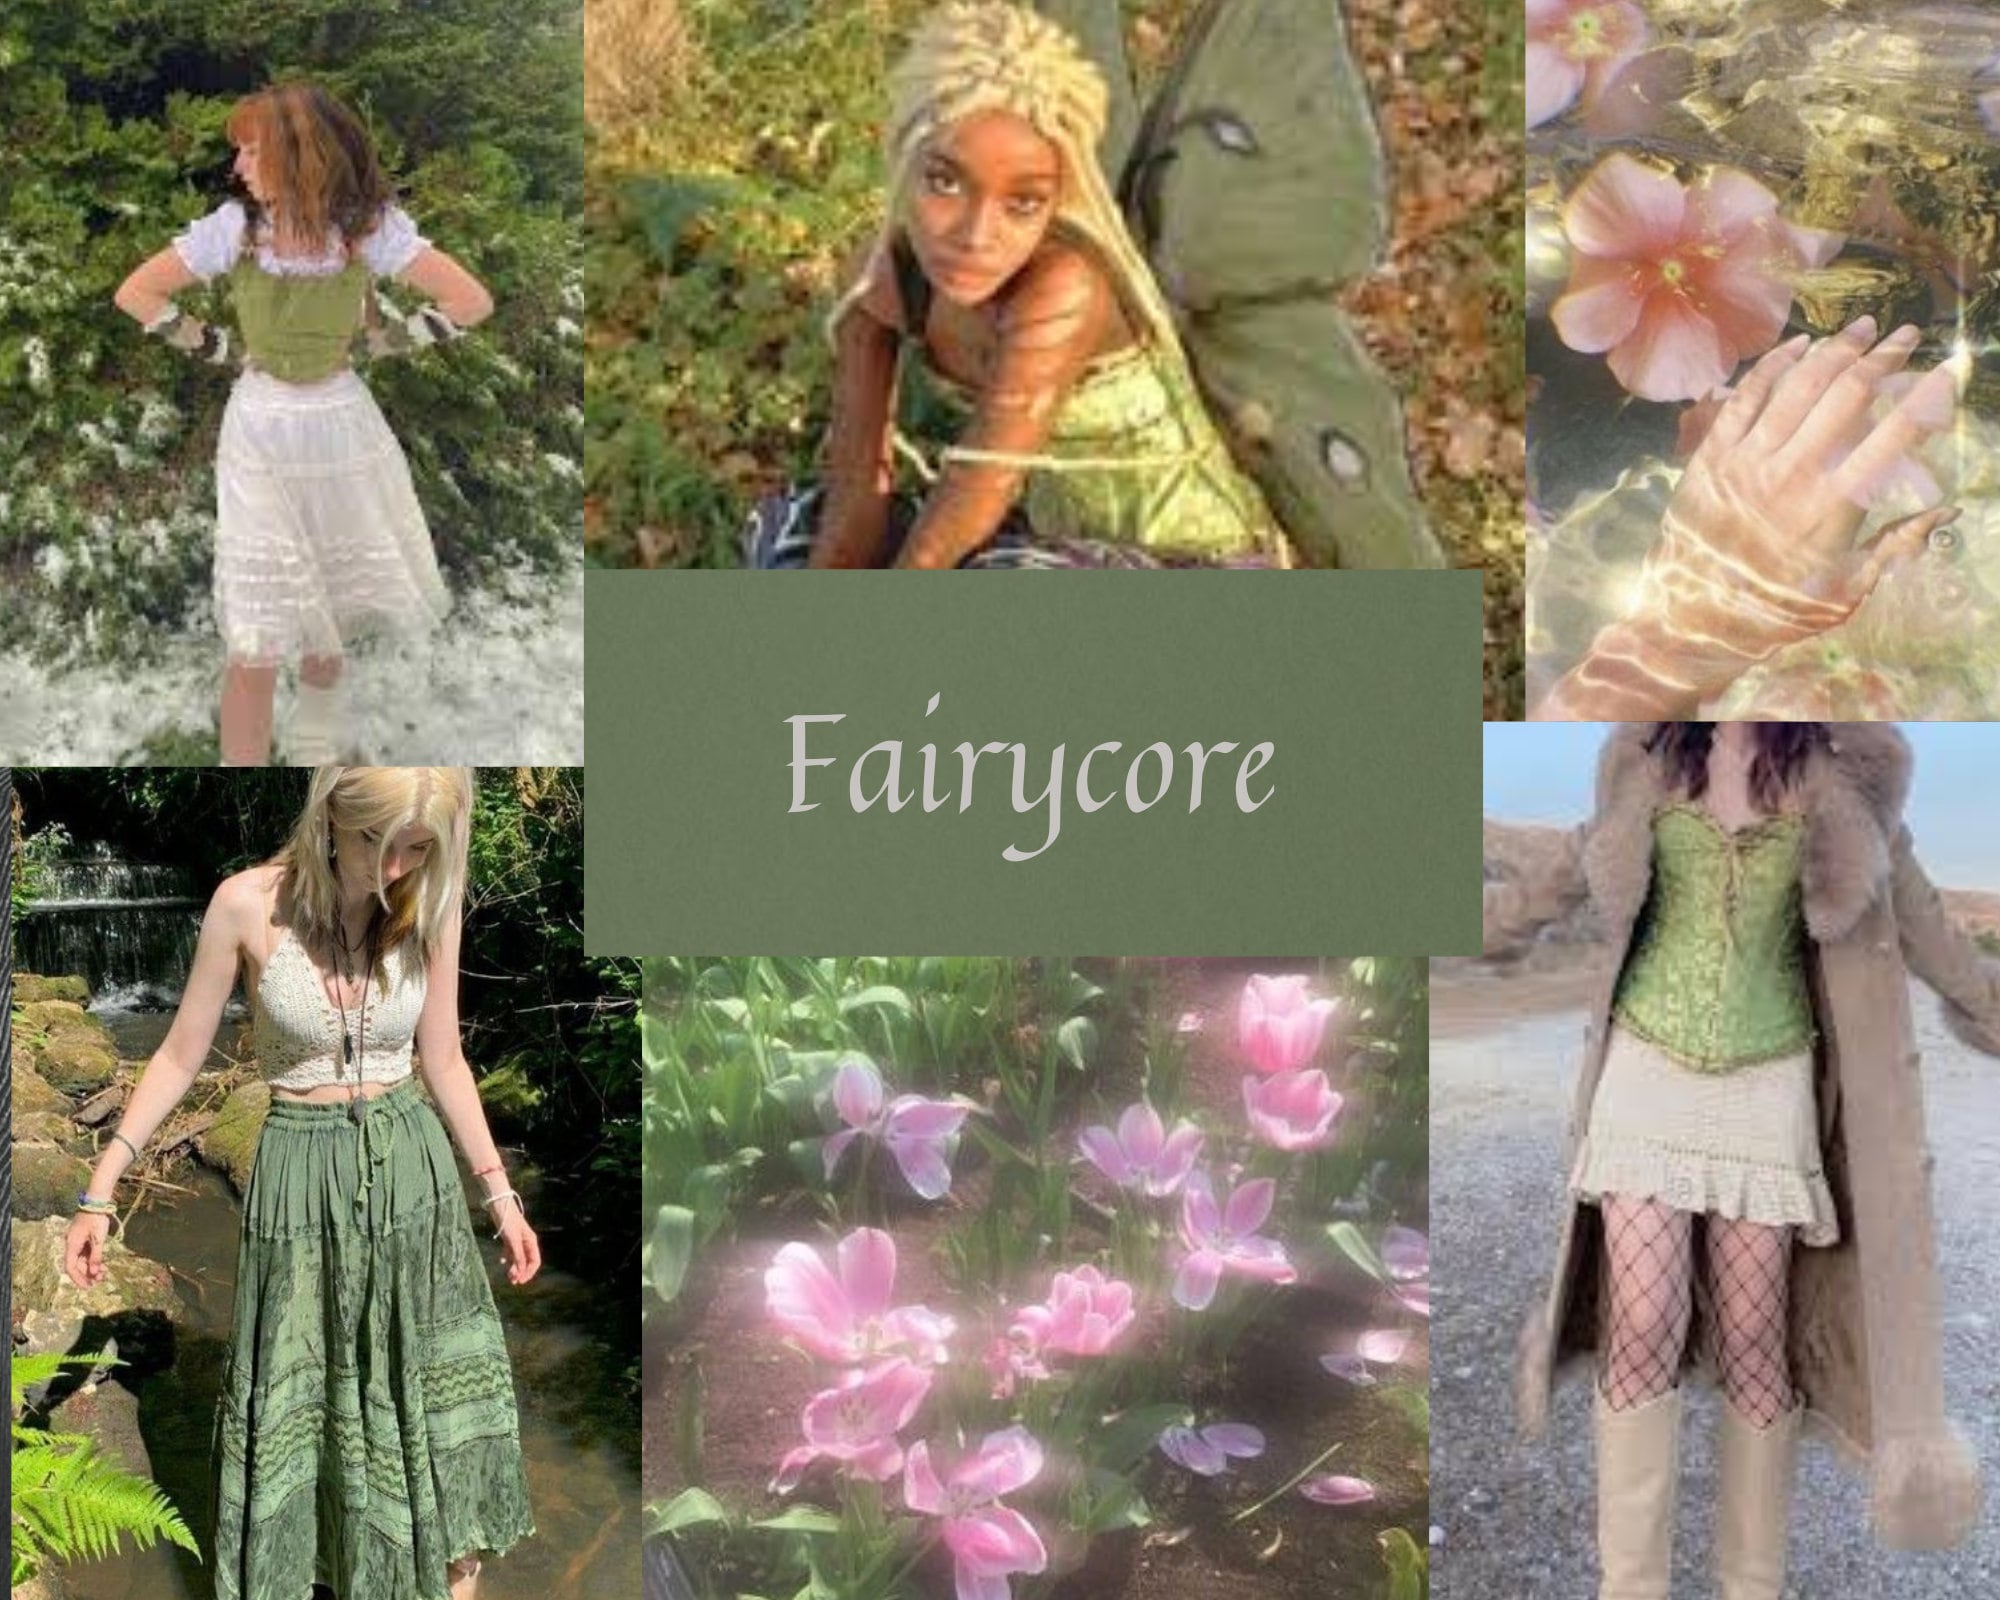 Fairy Core Aesthetic Mystery Box Bundle Clothing Clothes Style Gift for Her  Accessories Vintage Clothes Jewelry Cottagecore Cottage Mystery